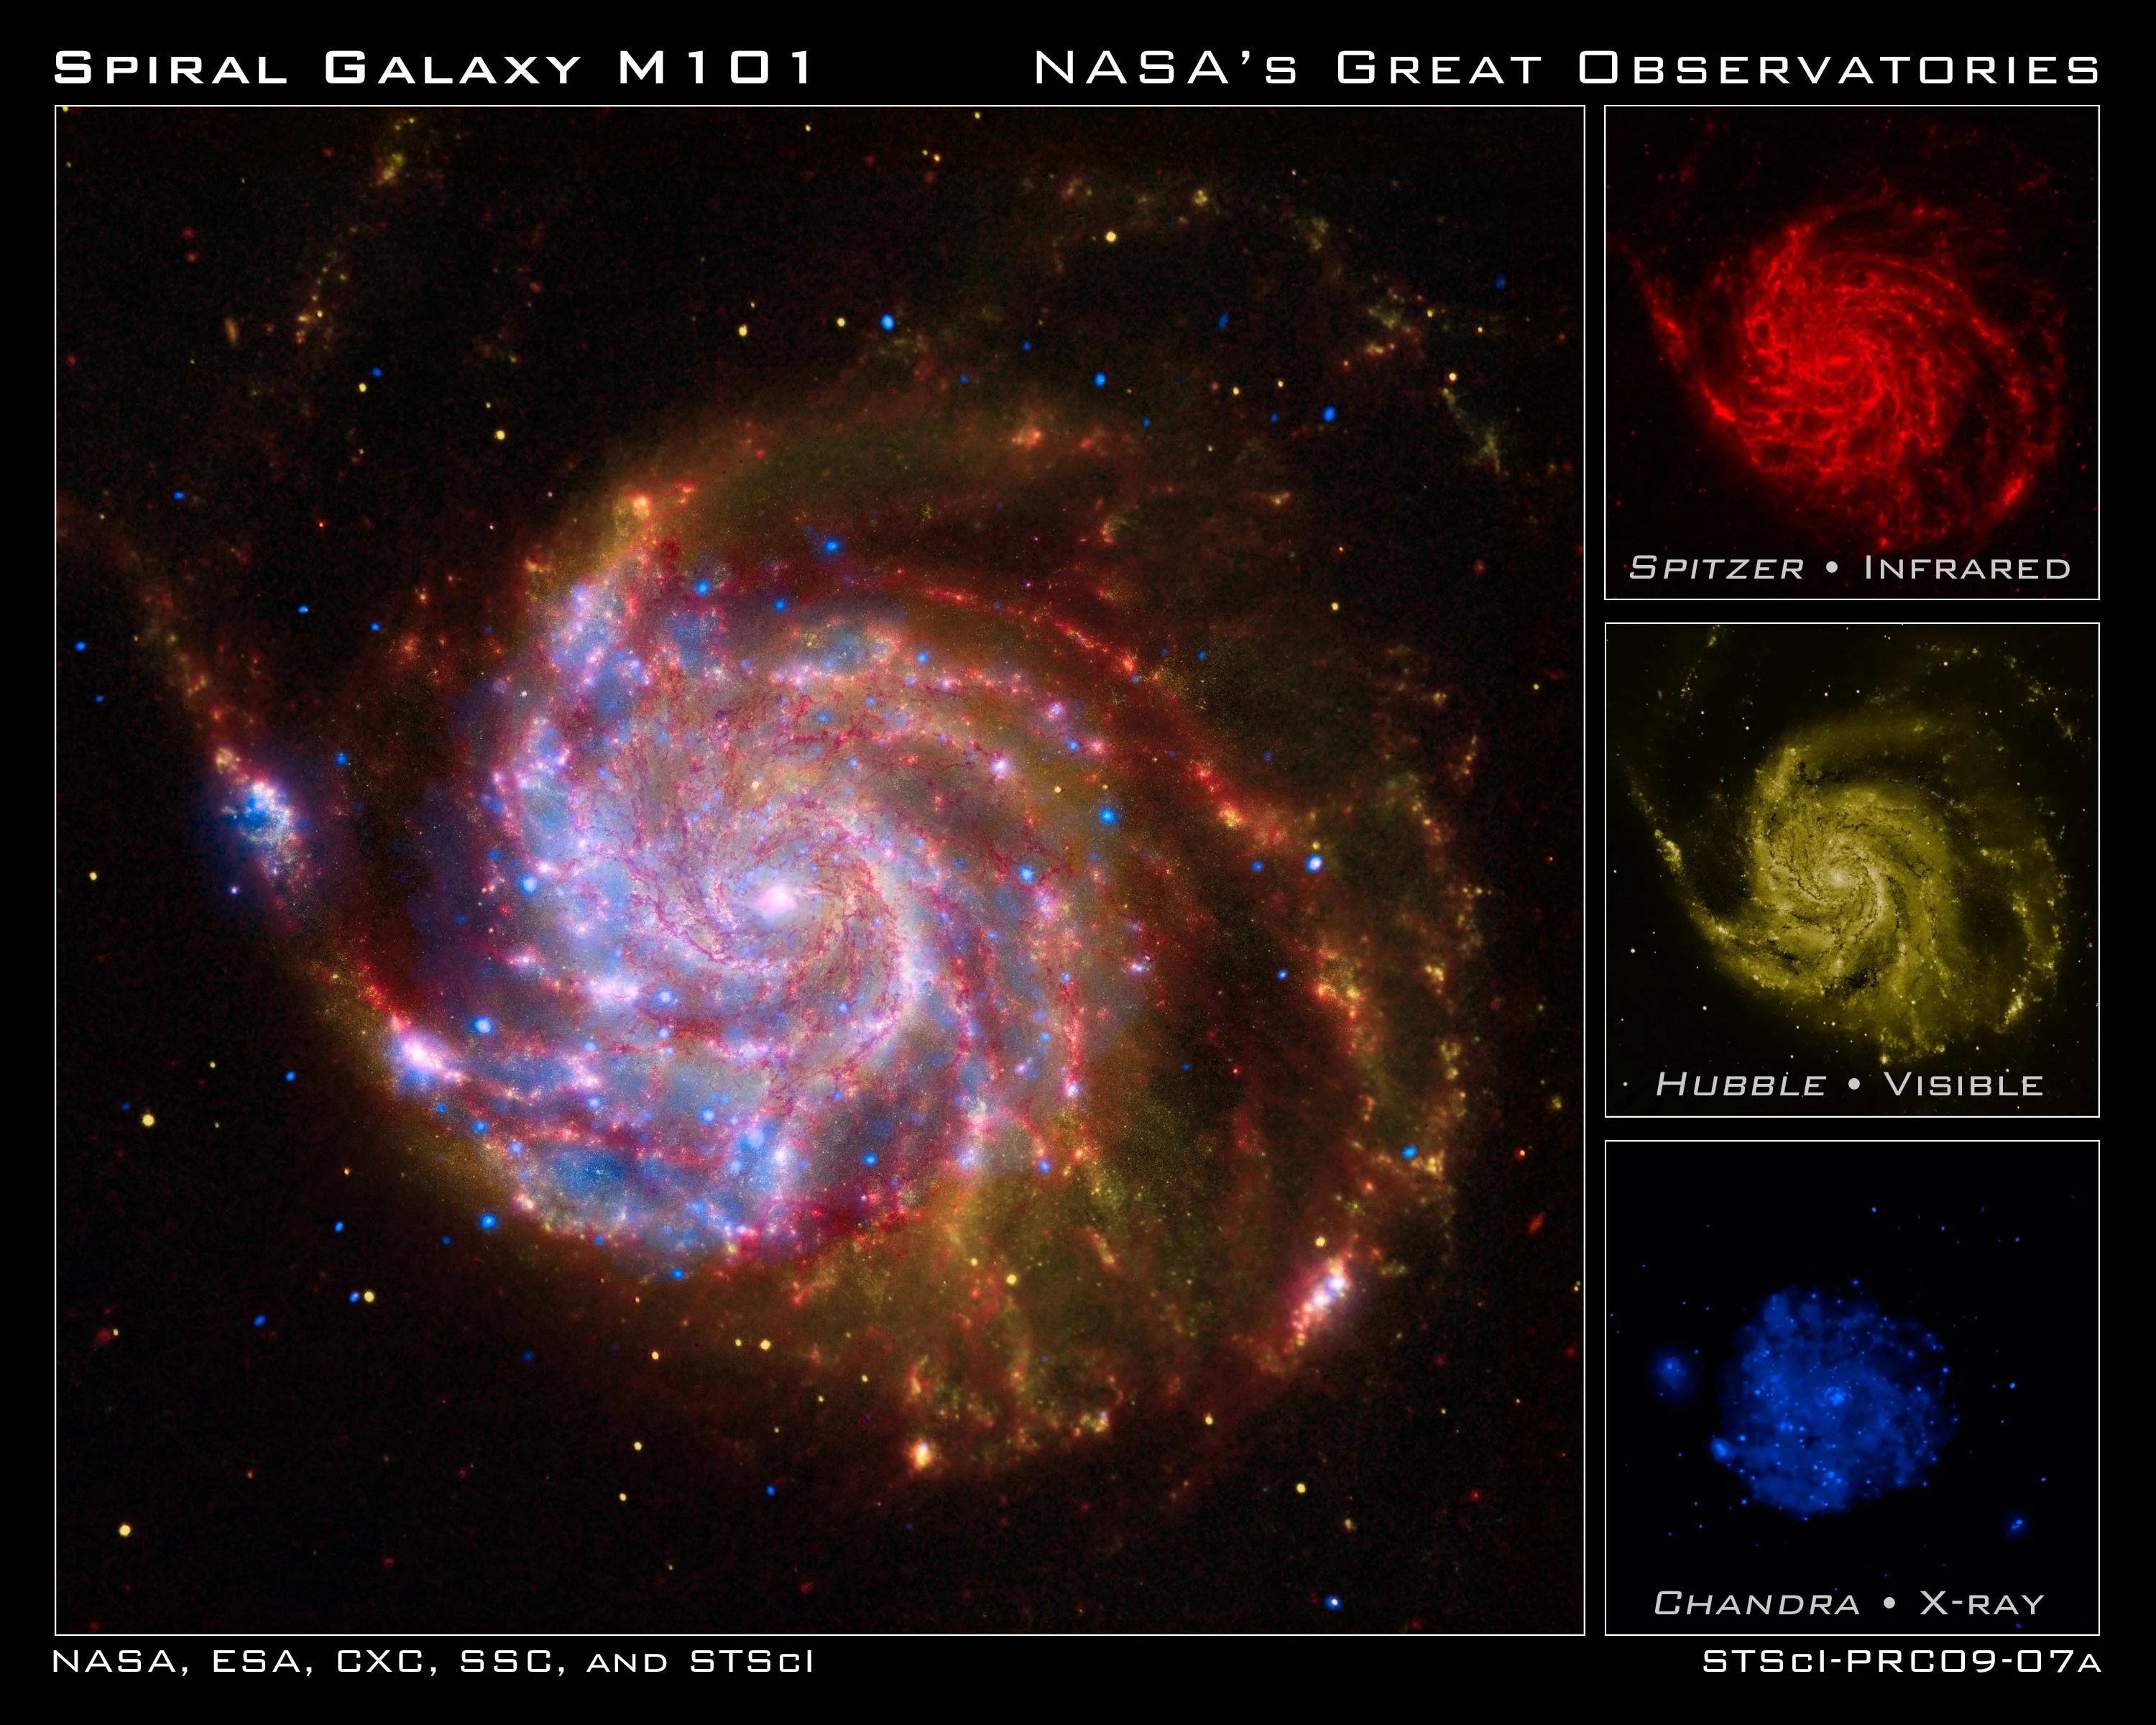 The three small images used for the composite show a galaxy in red, yellow, and blue. The composite shows all three colors together revealing a multi-colored galaxy.